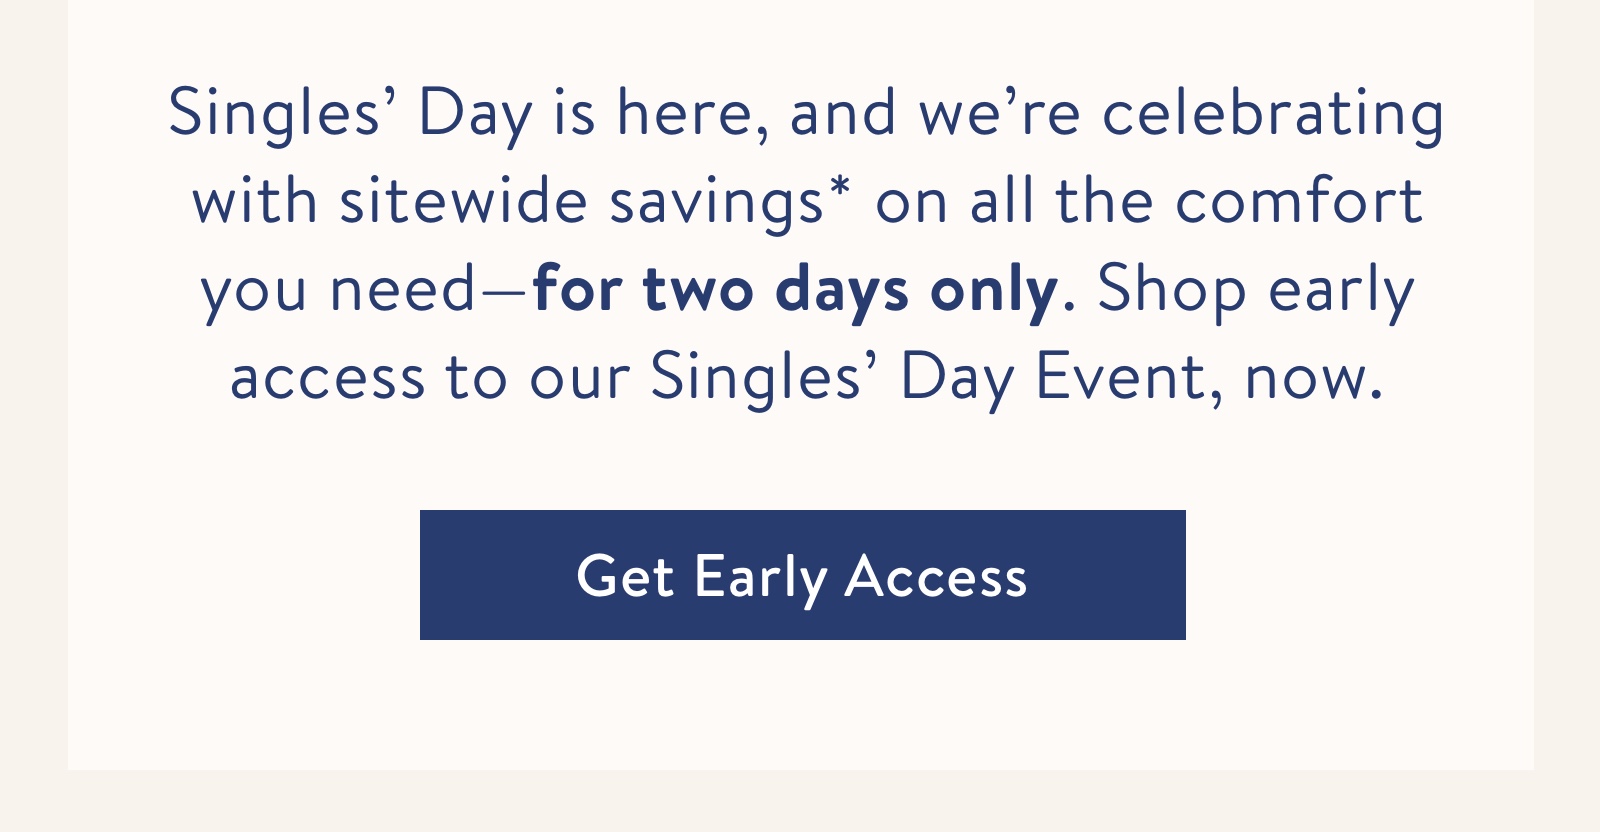 Shop early access to our Singles' Day Event, now.